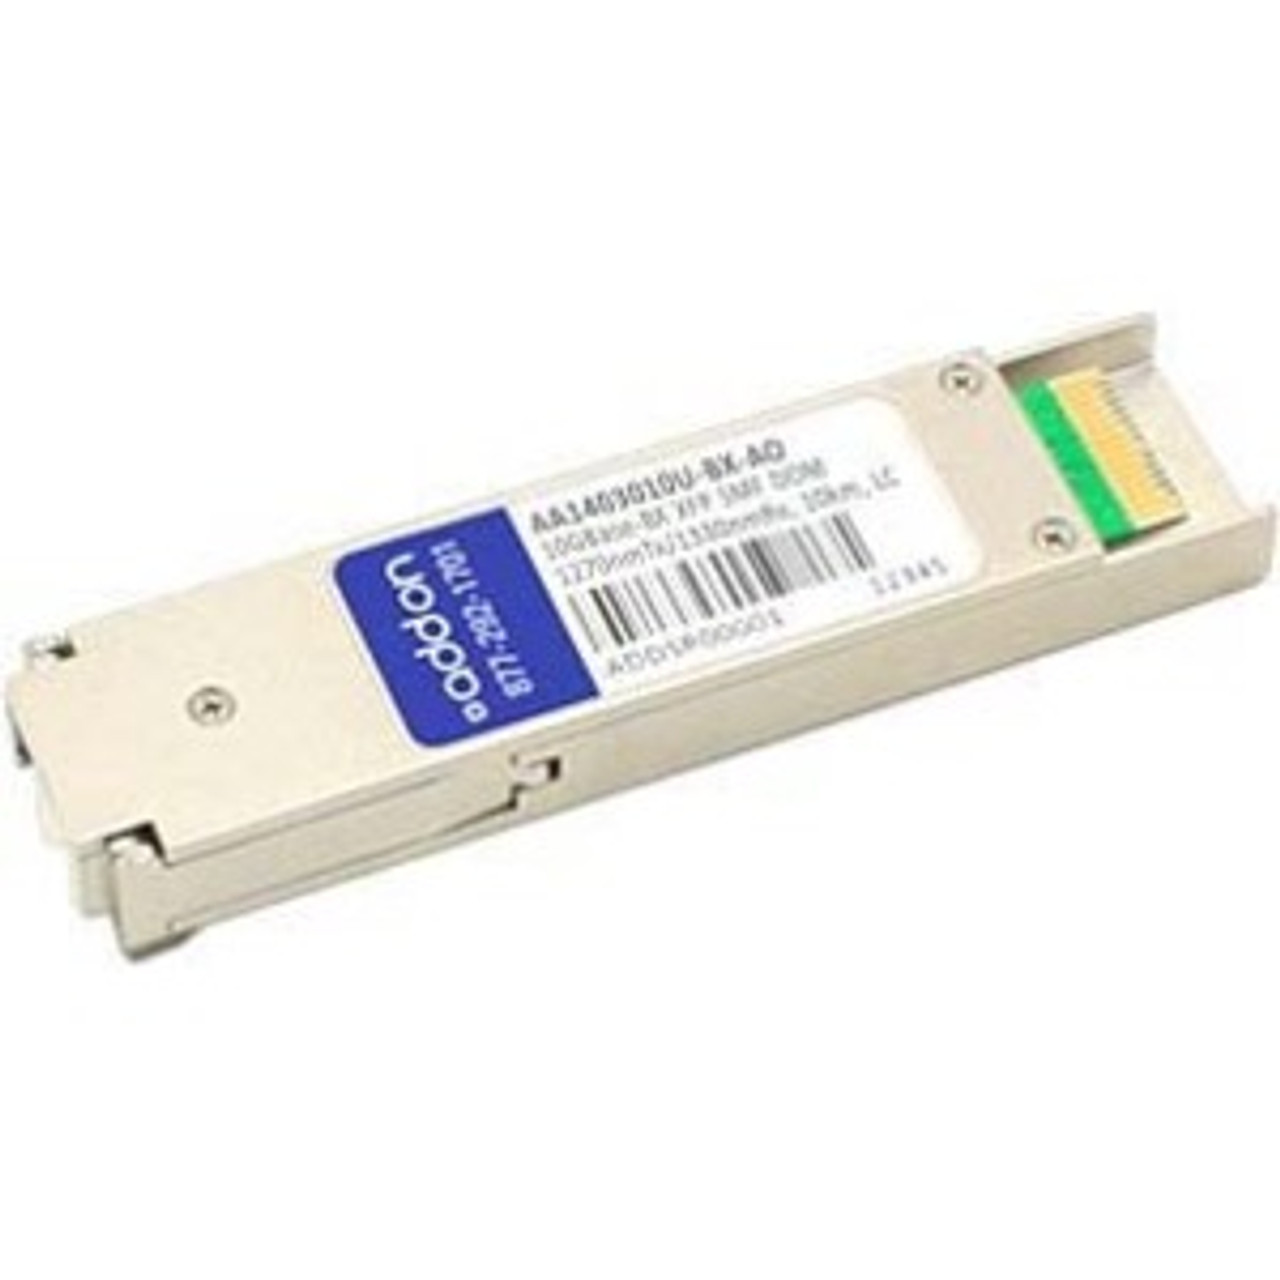 AA1403010U-BX-AO AddOn 10Gbps 10GBase-BX Single-mode Fiber 10km 1270nmTX/1330nmRX LC Connector XFP Transceiver Module for Avaya Compatible